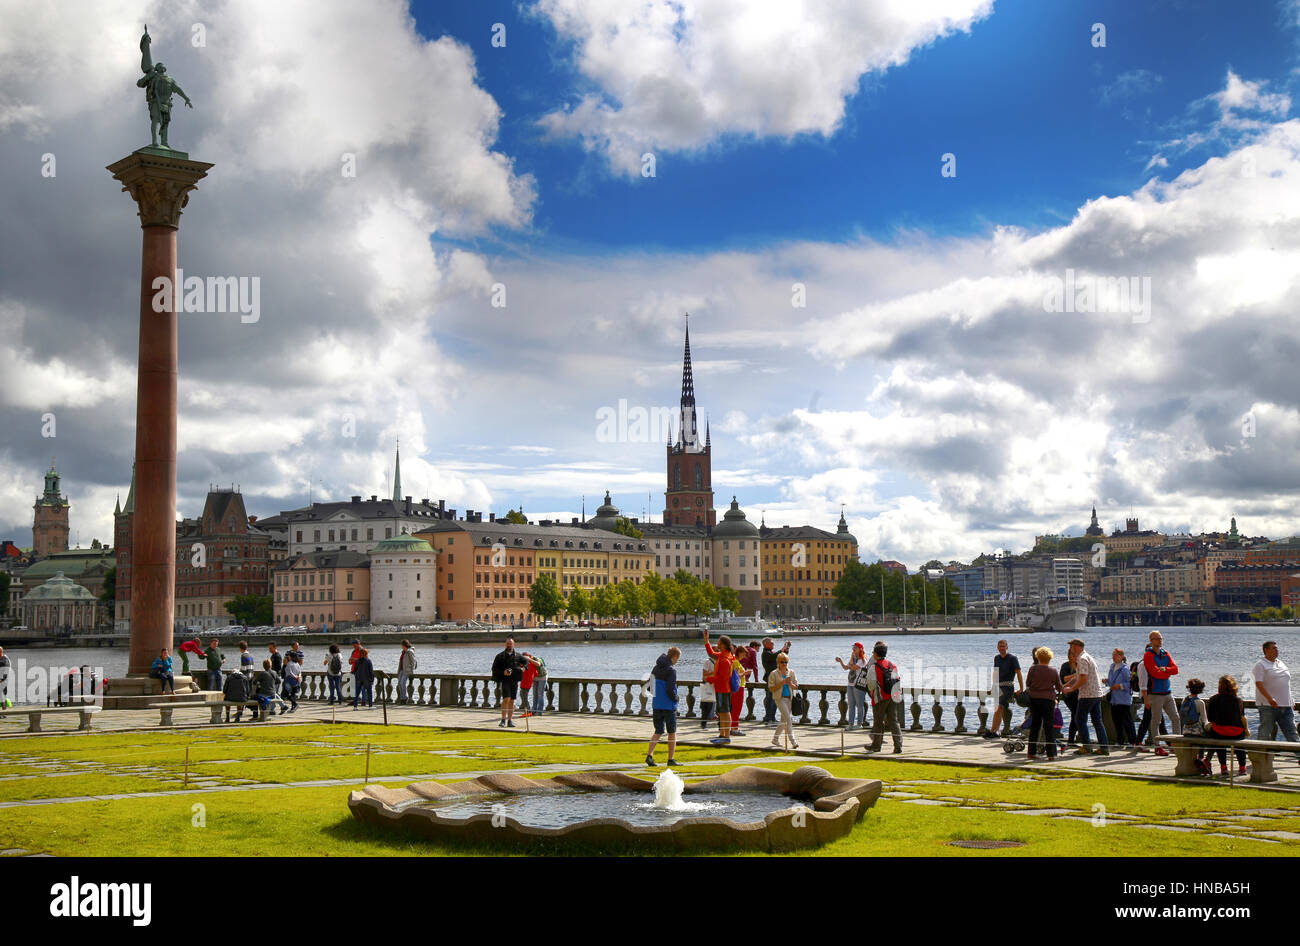 STOCKHOLM, SWEDEN - AUGUST 19, 2016: Tourists walk and visit Stockholm City Hall ( Stadshuset ) and View of Gamla Stan in Stockholm, Sweden on August  Stock Photo